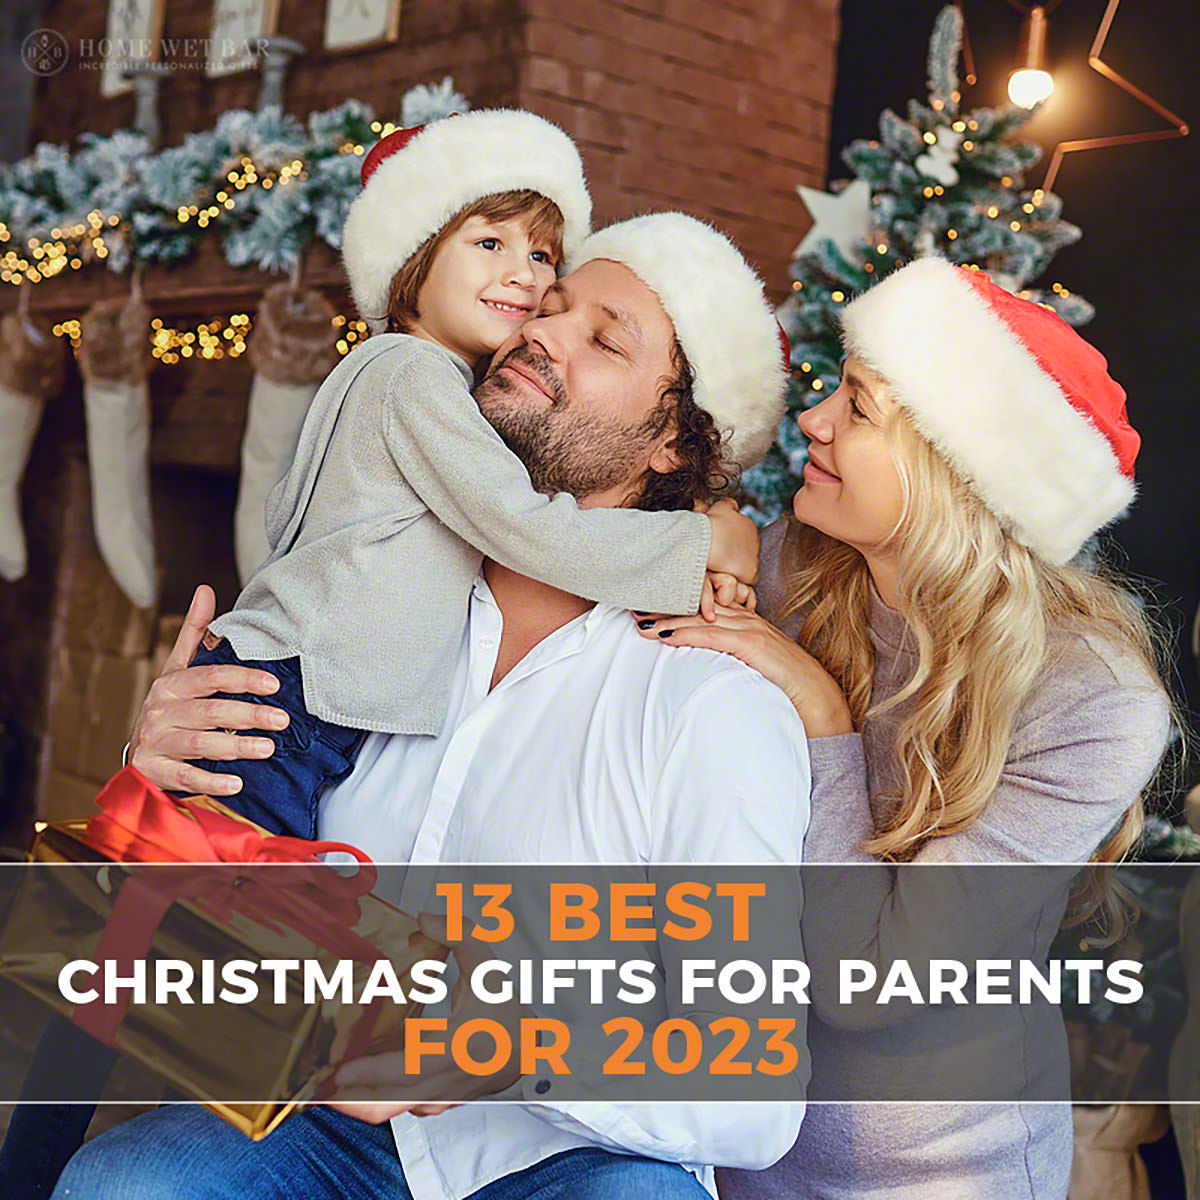 13 Best Christmas Gifts for Parents for 2023